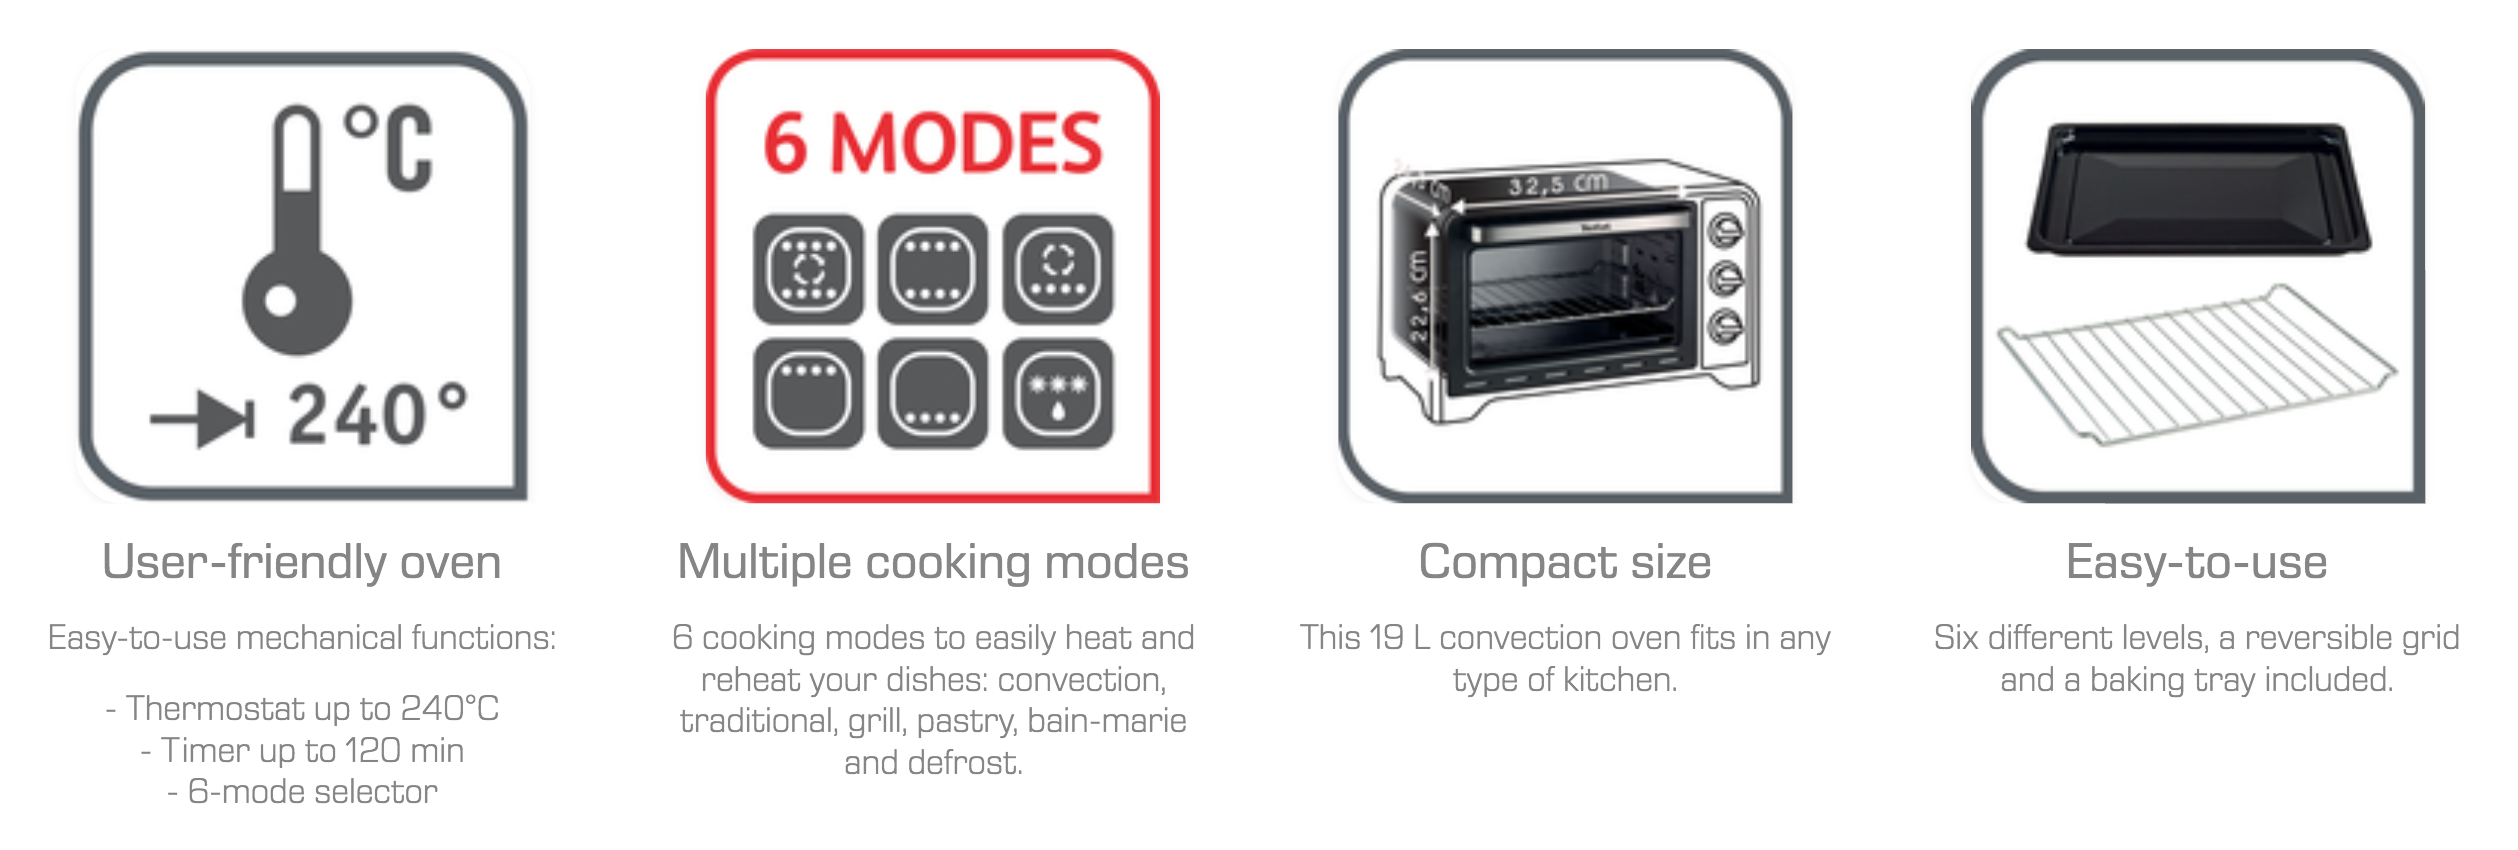 Tefal OF4448 19L Free-standing Mini Oven